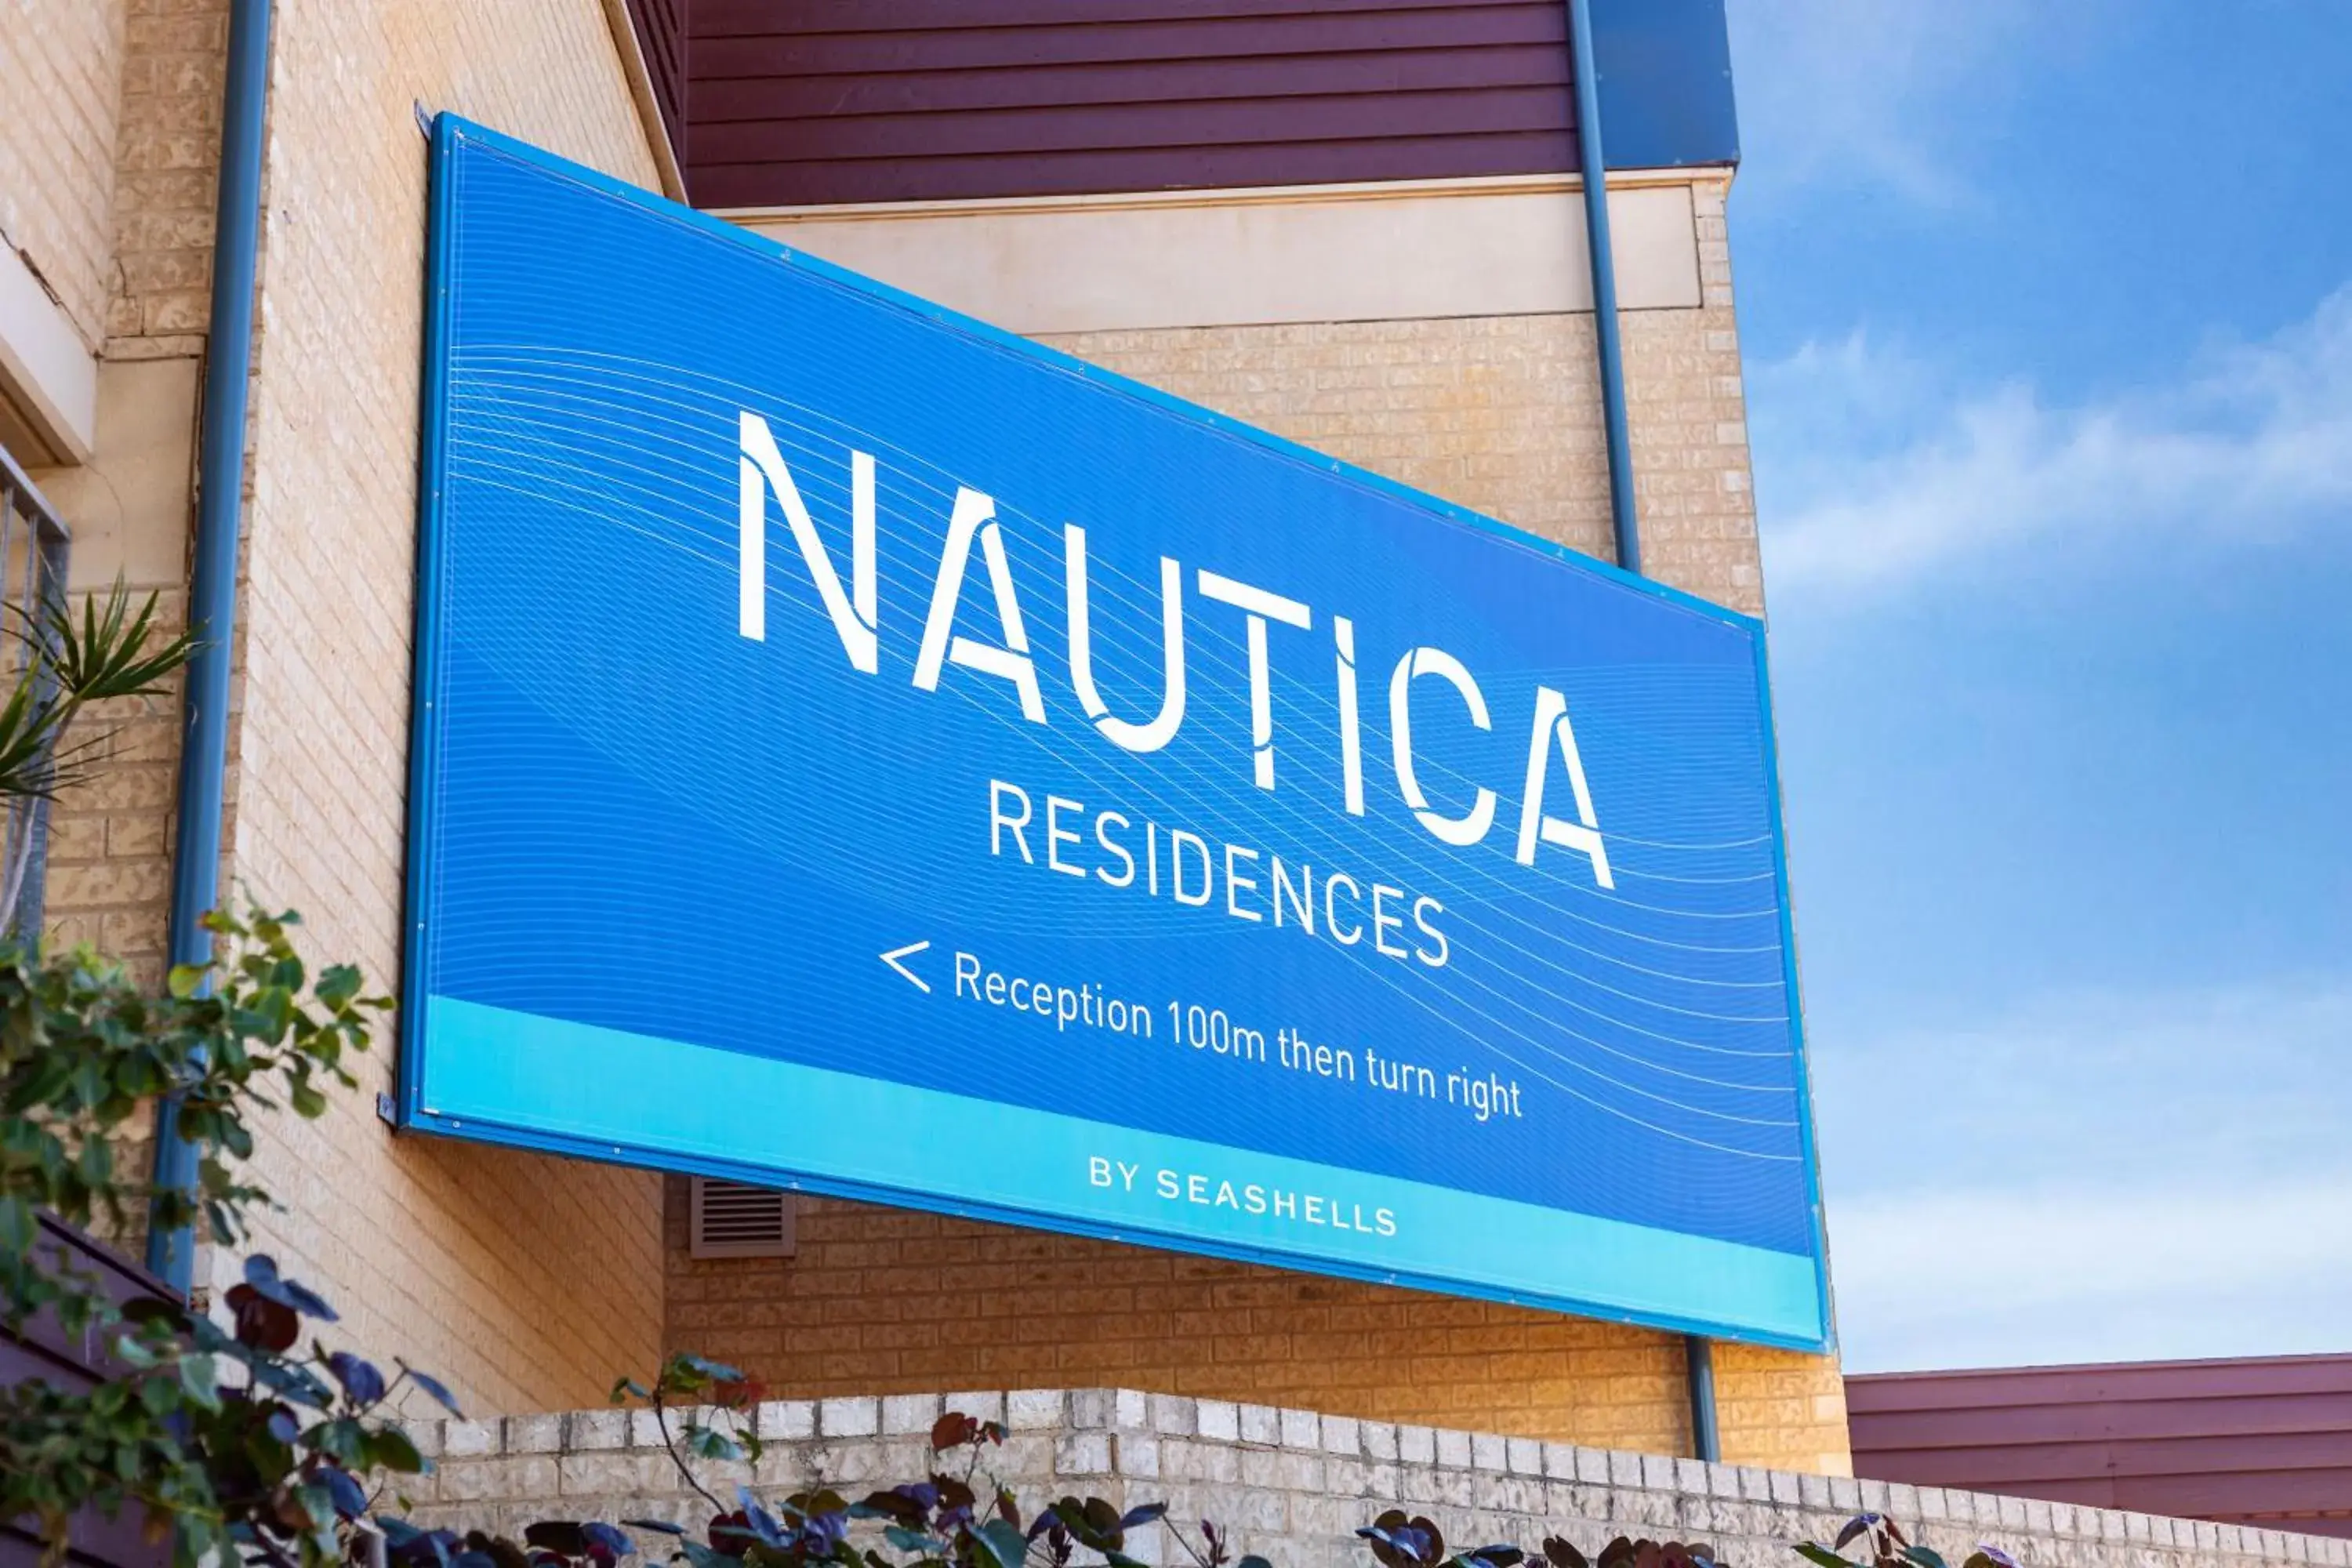 Property logo or sign in Nautica Residences Hillarys